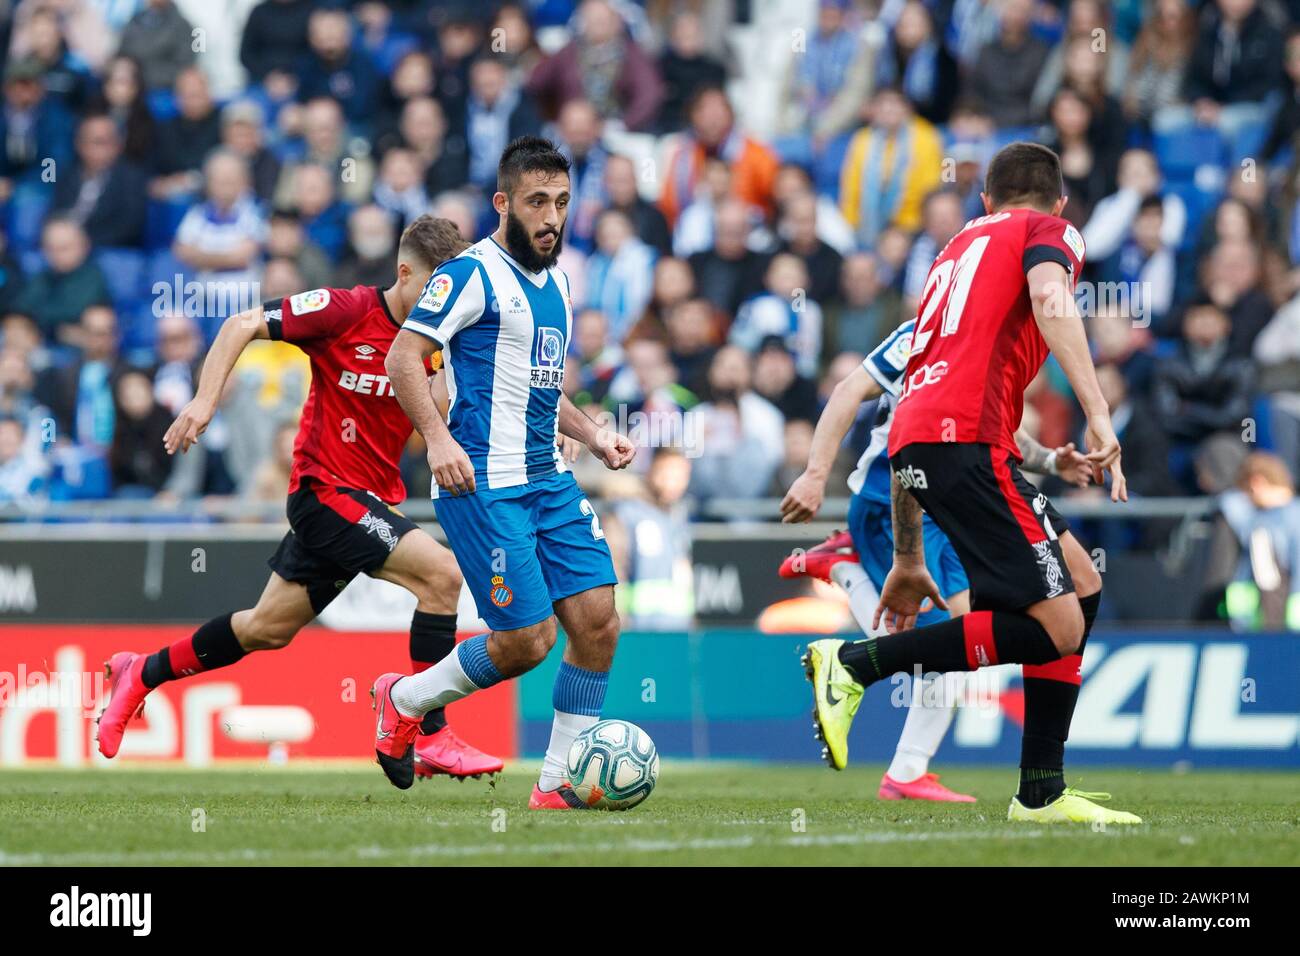 Cornella Del Llobregat, Spain. 09th Feb, 2020. BARCELONA, SPAIN - FEBRUARY 09: Matias Vargas of RCD Espanyol in action during the Liga match between RCD Espanyol and FC Barcelona at RCD Stadium on February 09, 2020 in Barcelona, Spain. Credit: Dax Images/Alamy Live News Stock Photo